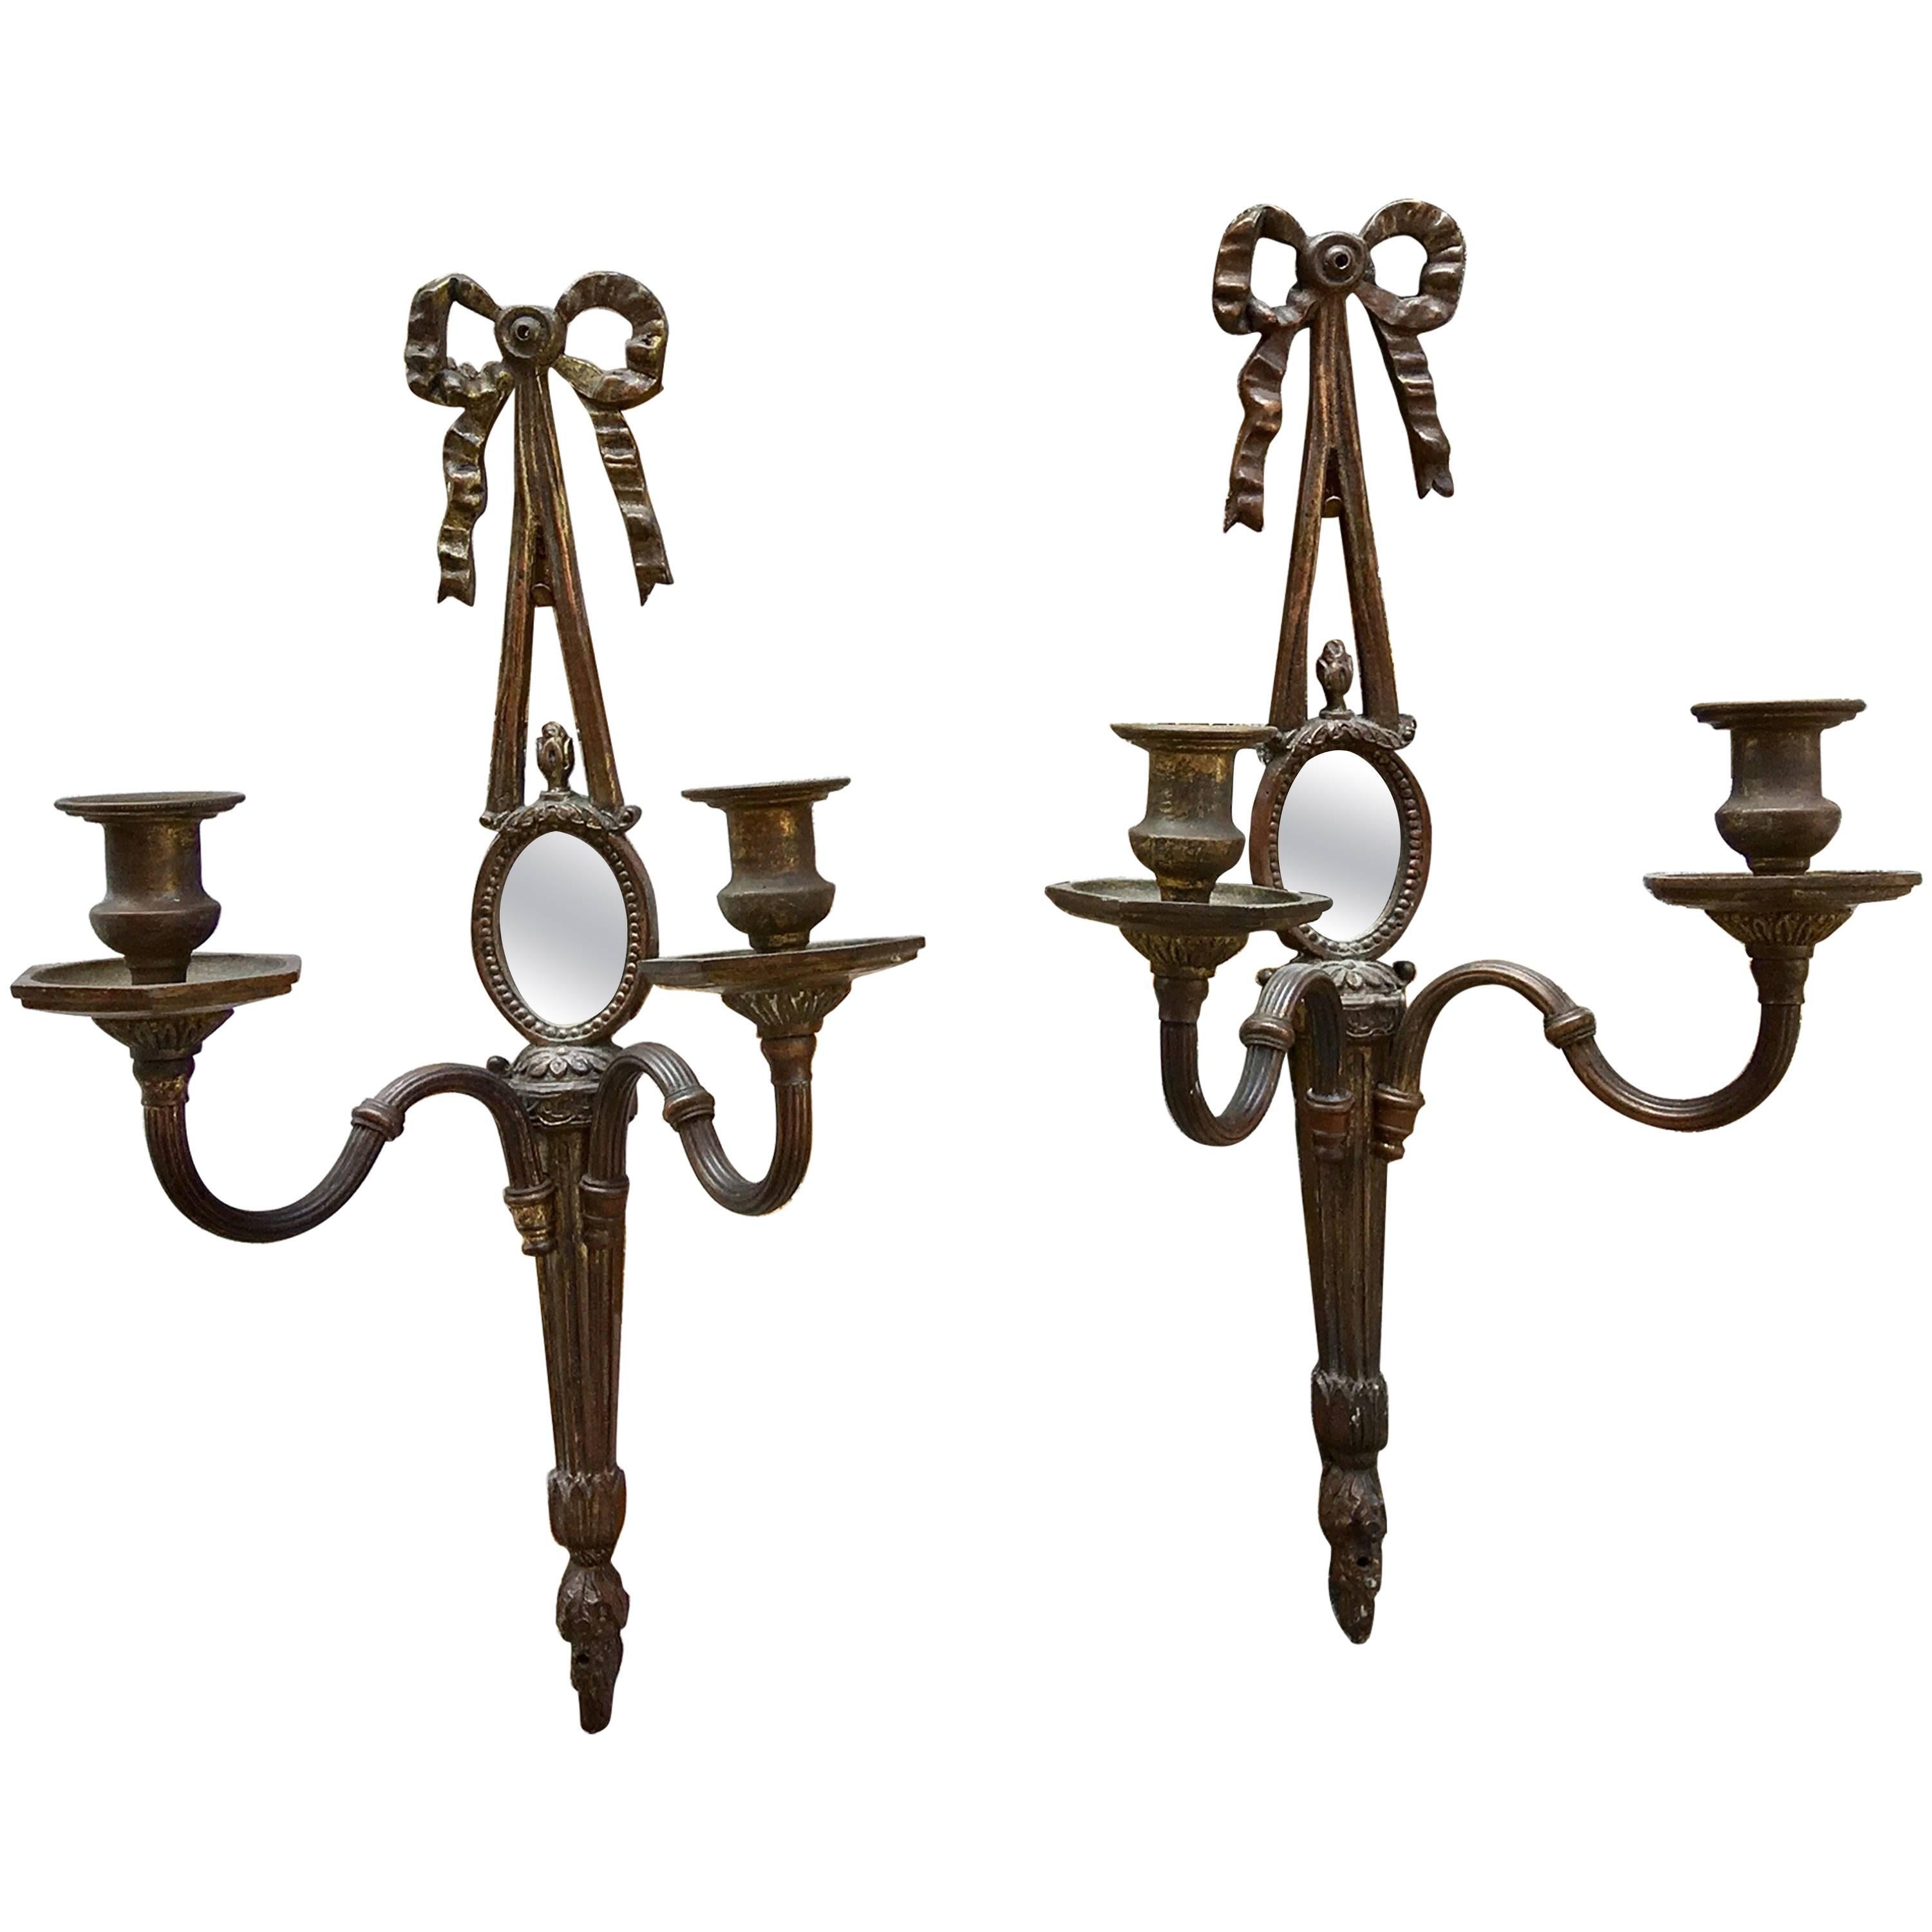 Pair of Small Double Arm Wall Sconce, English, circa 1900